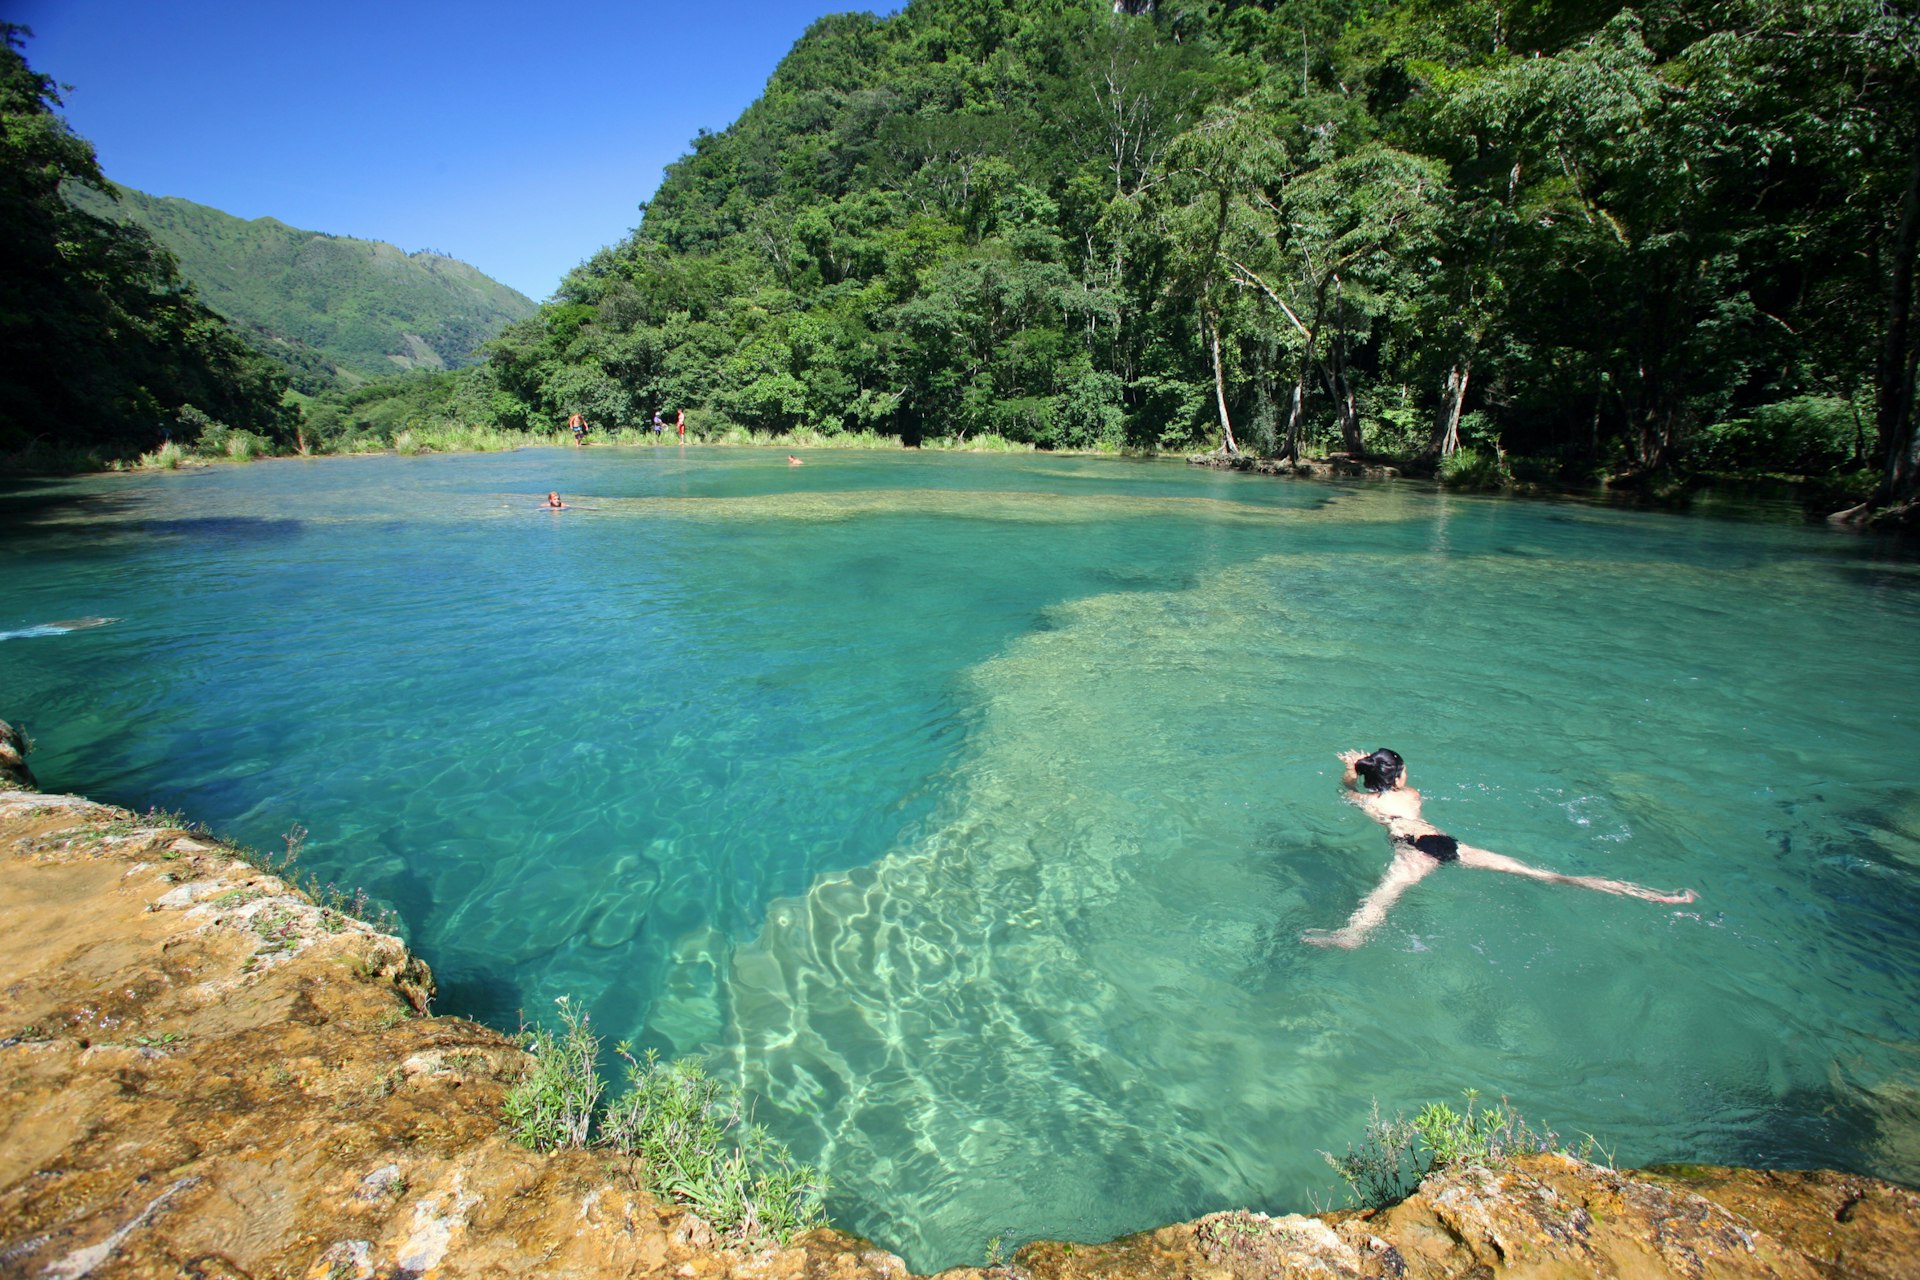 Visitors swimming in turquoise-coloured waters at Semuc Champey